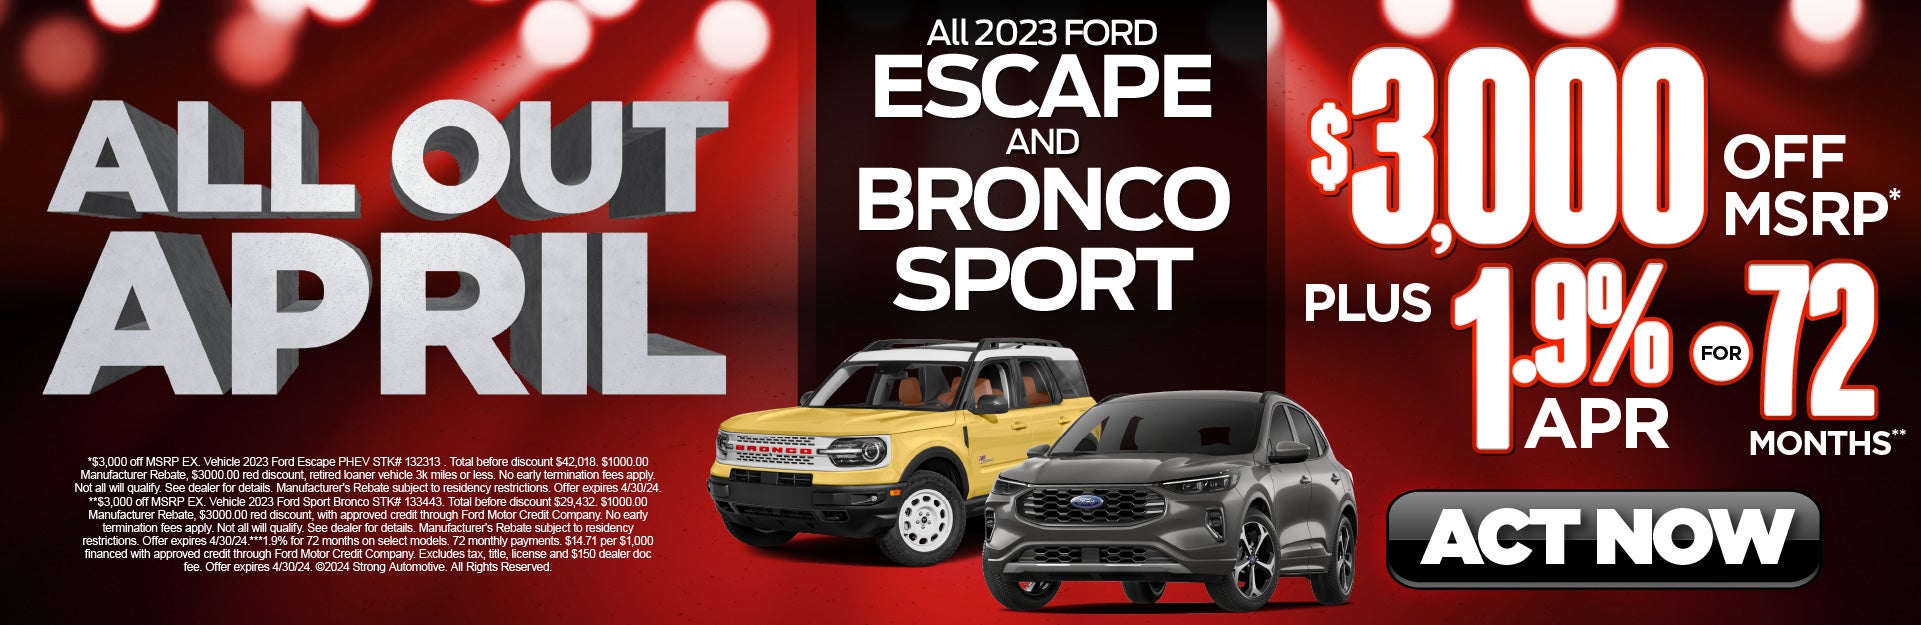 2023 Escape and bronco sport $3,000 off MSRP*